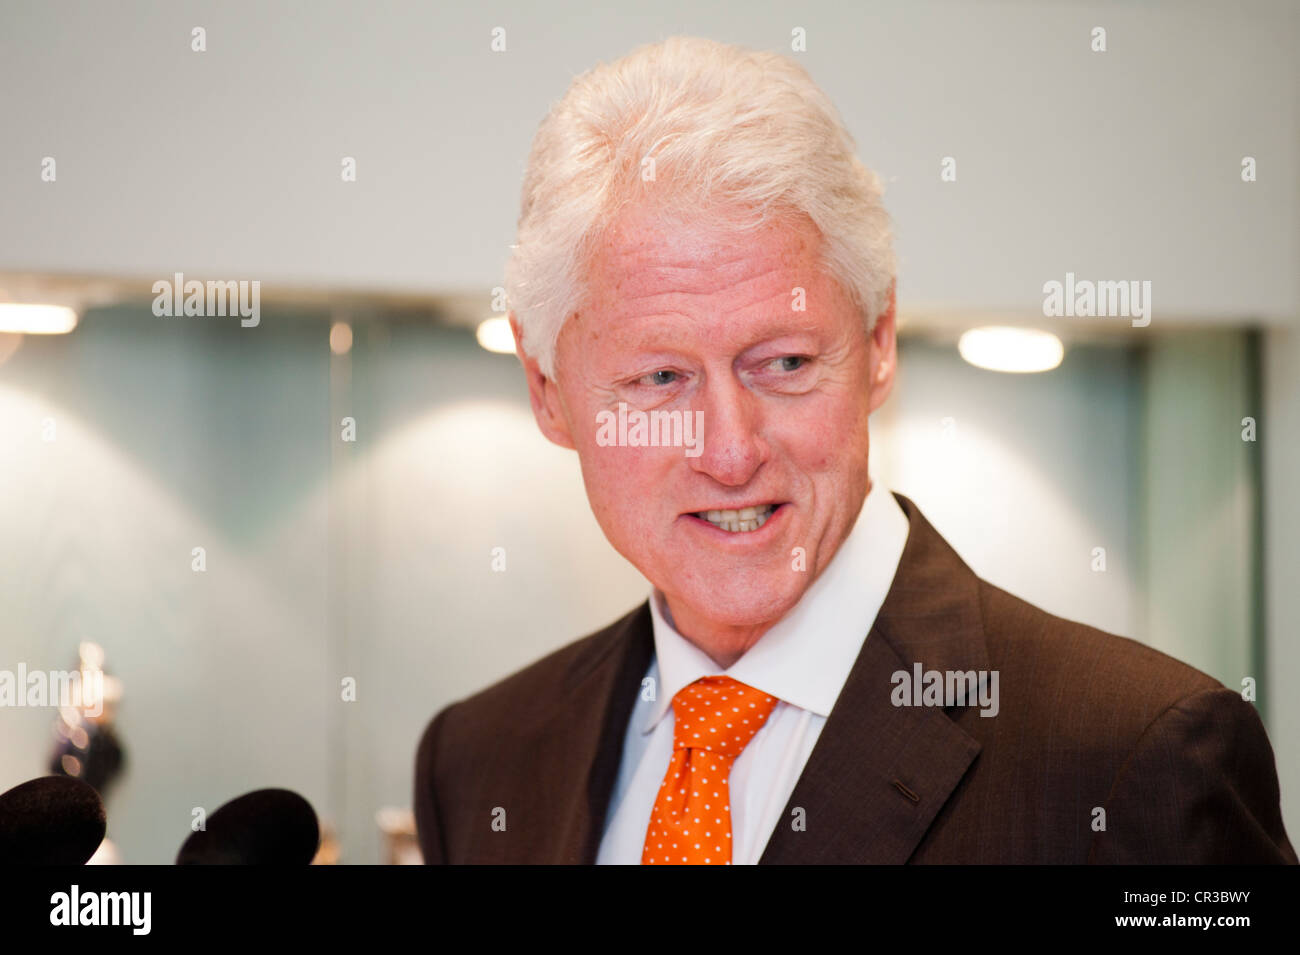 Former American president Bill Clinton speaks at an event Stock Photo